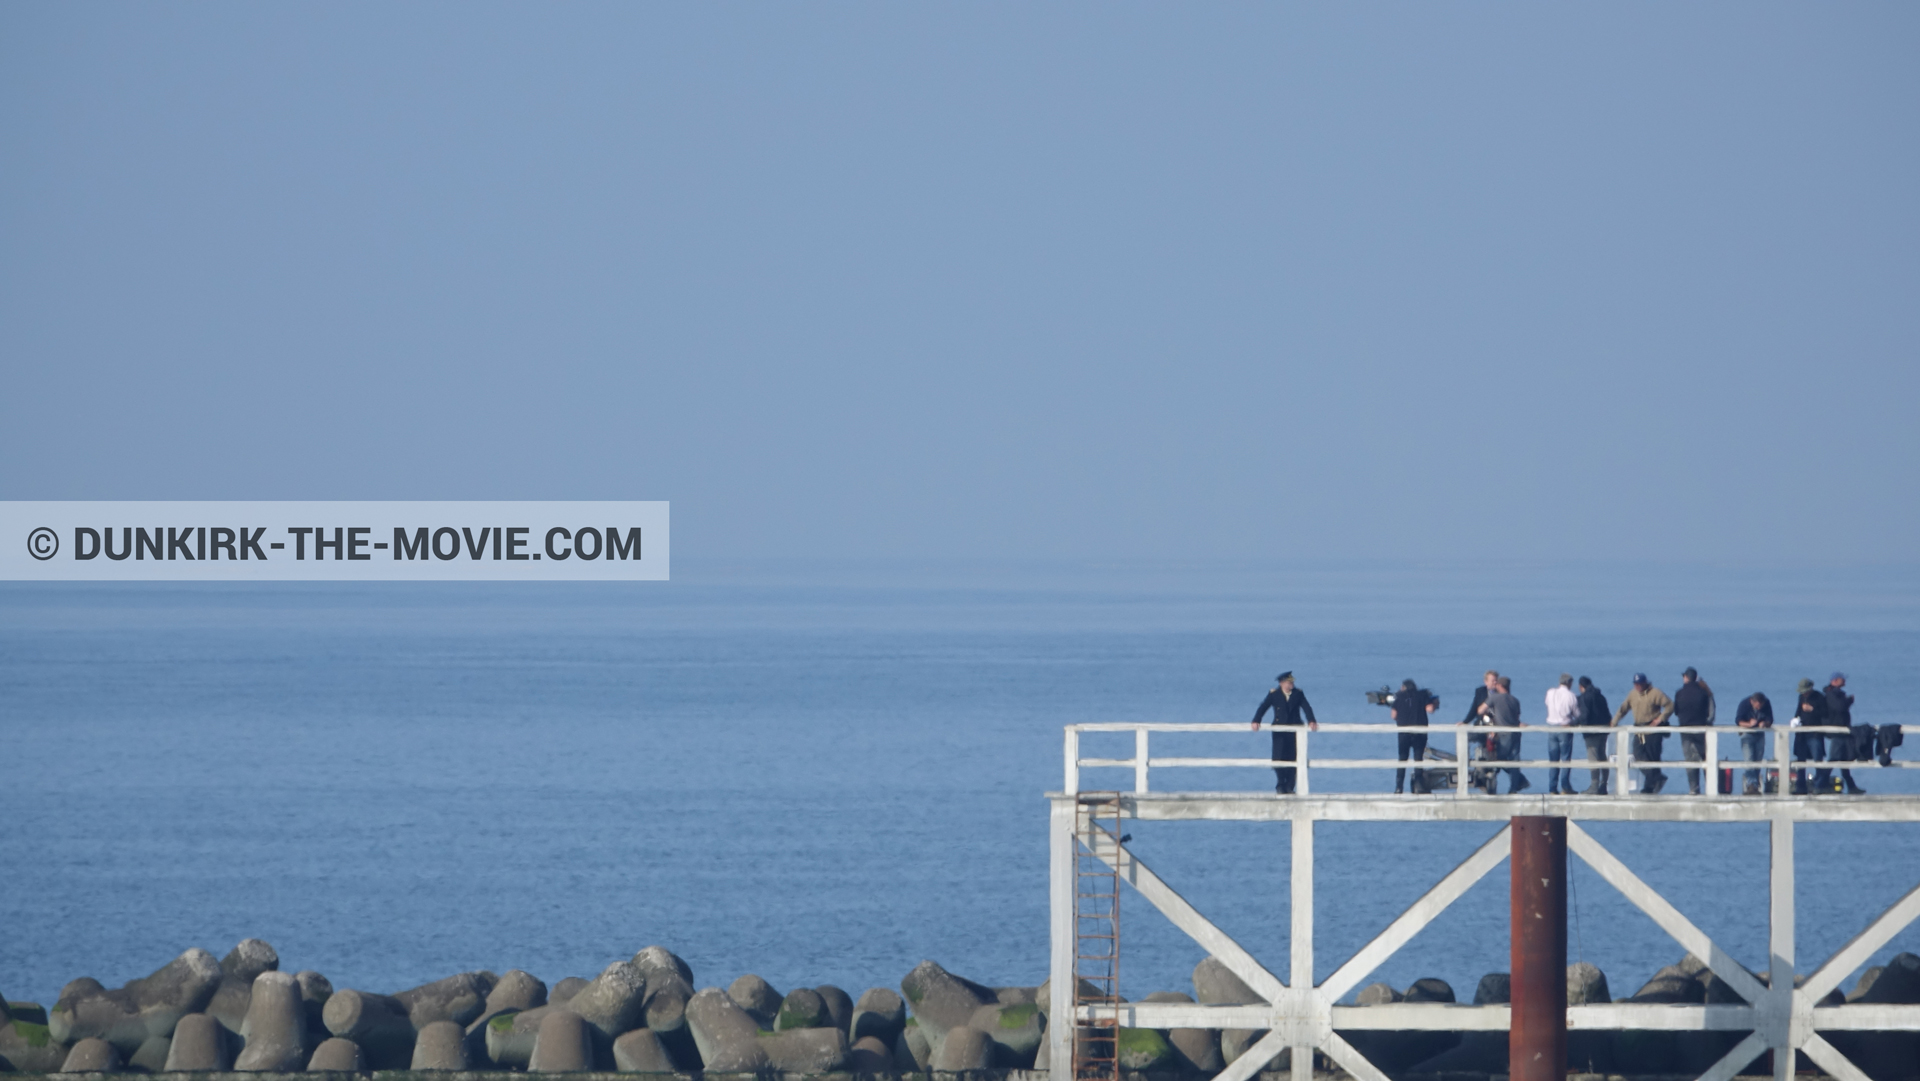 Picture with blue sky, Hoyte van Hoytema, EST pier, Kenneth Branagh, Christopher Nolan, technical team,  from behind the scene of the Dunkirk movie by Nolan